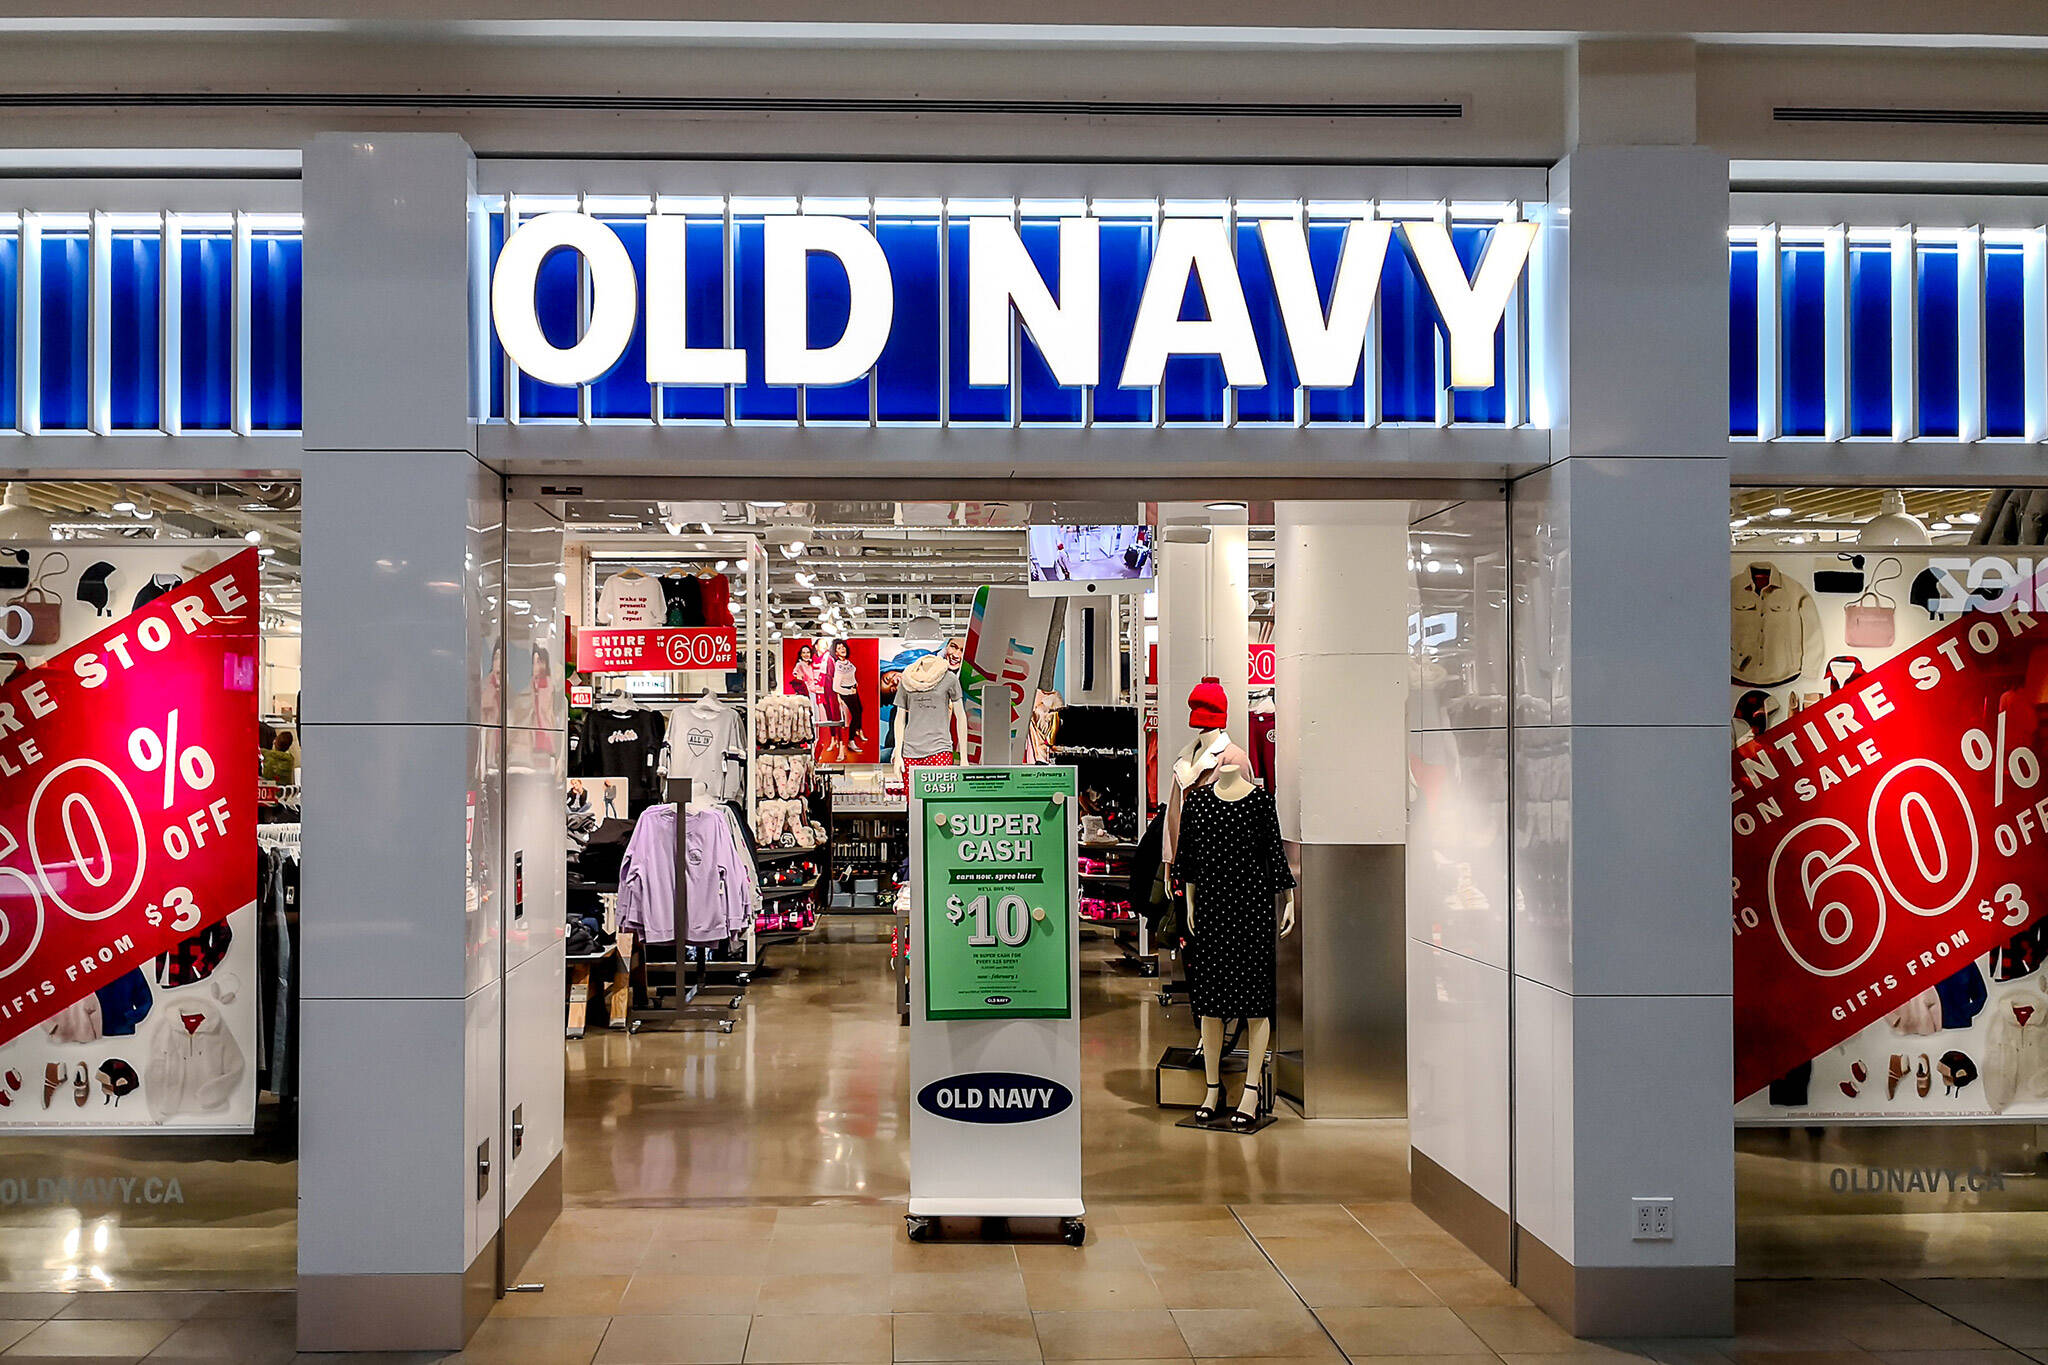 Old Navy is closing two major stores in Toronto area malls